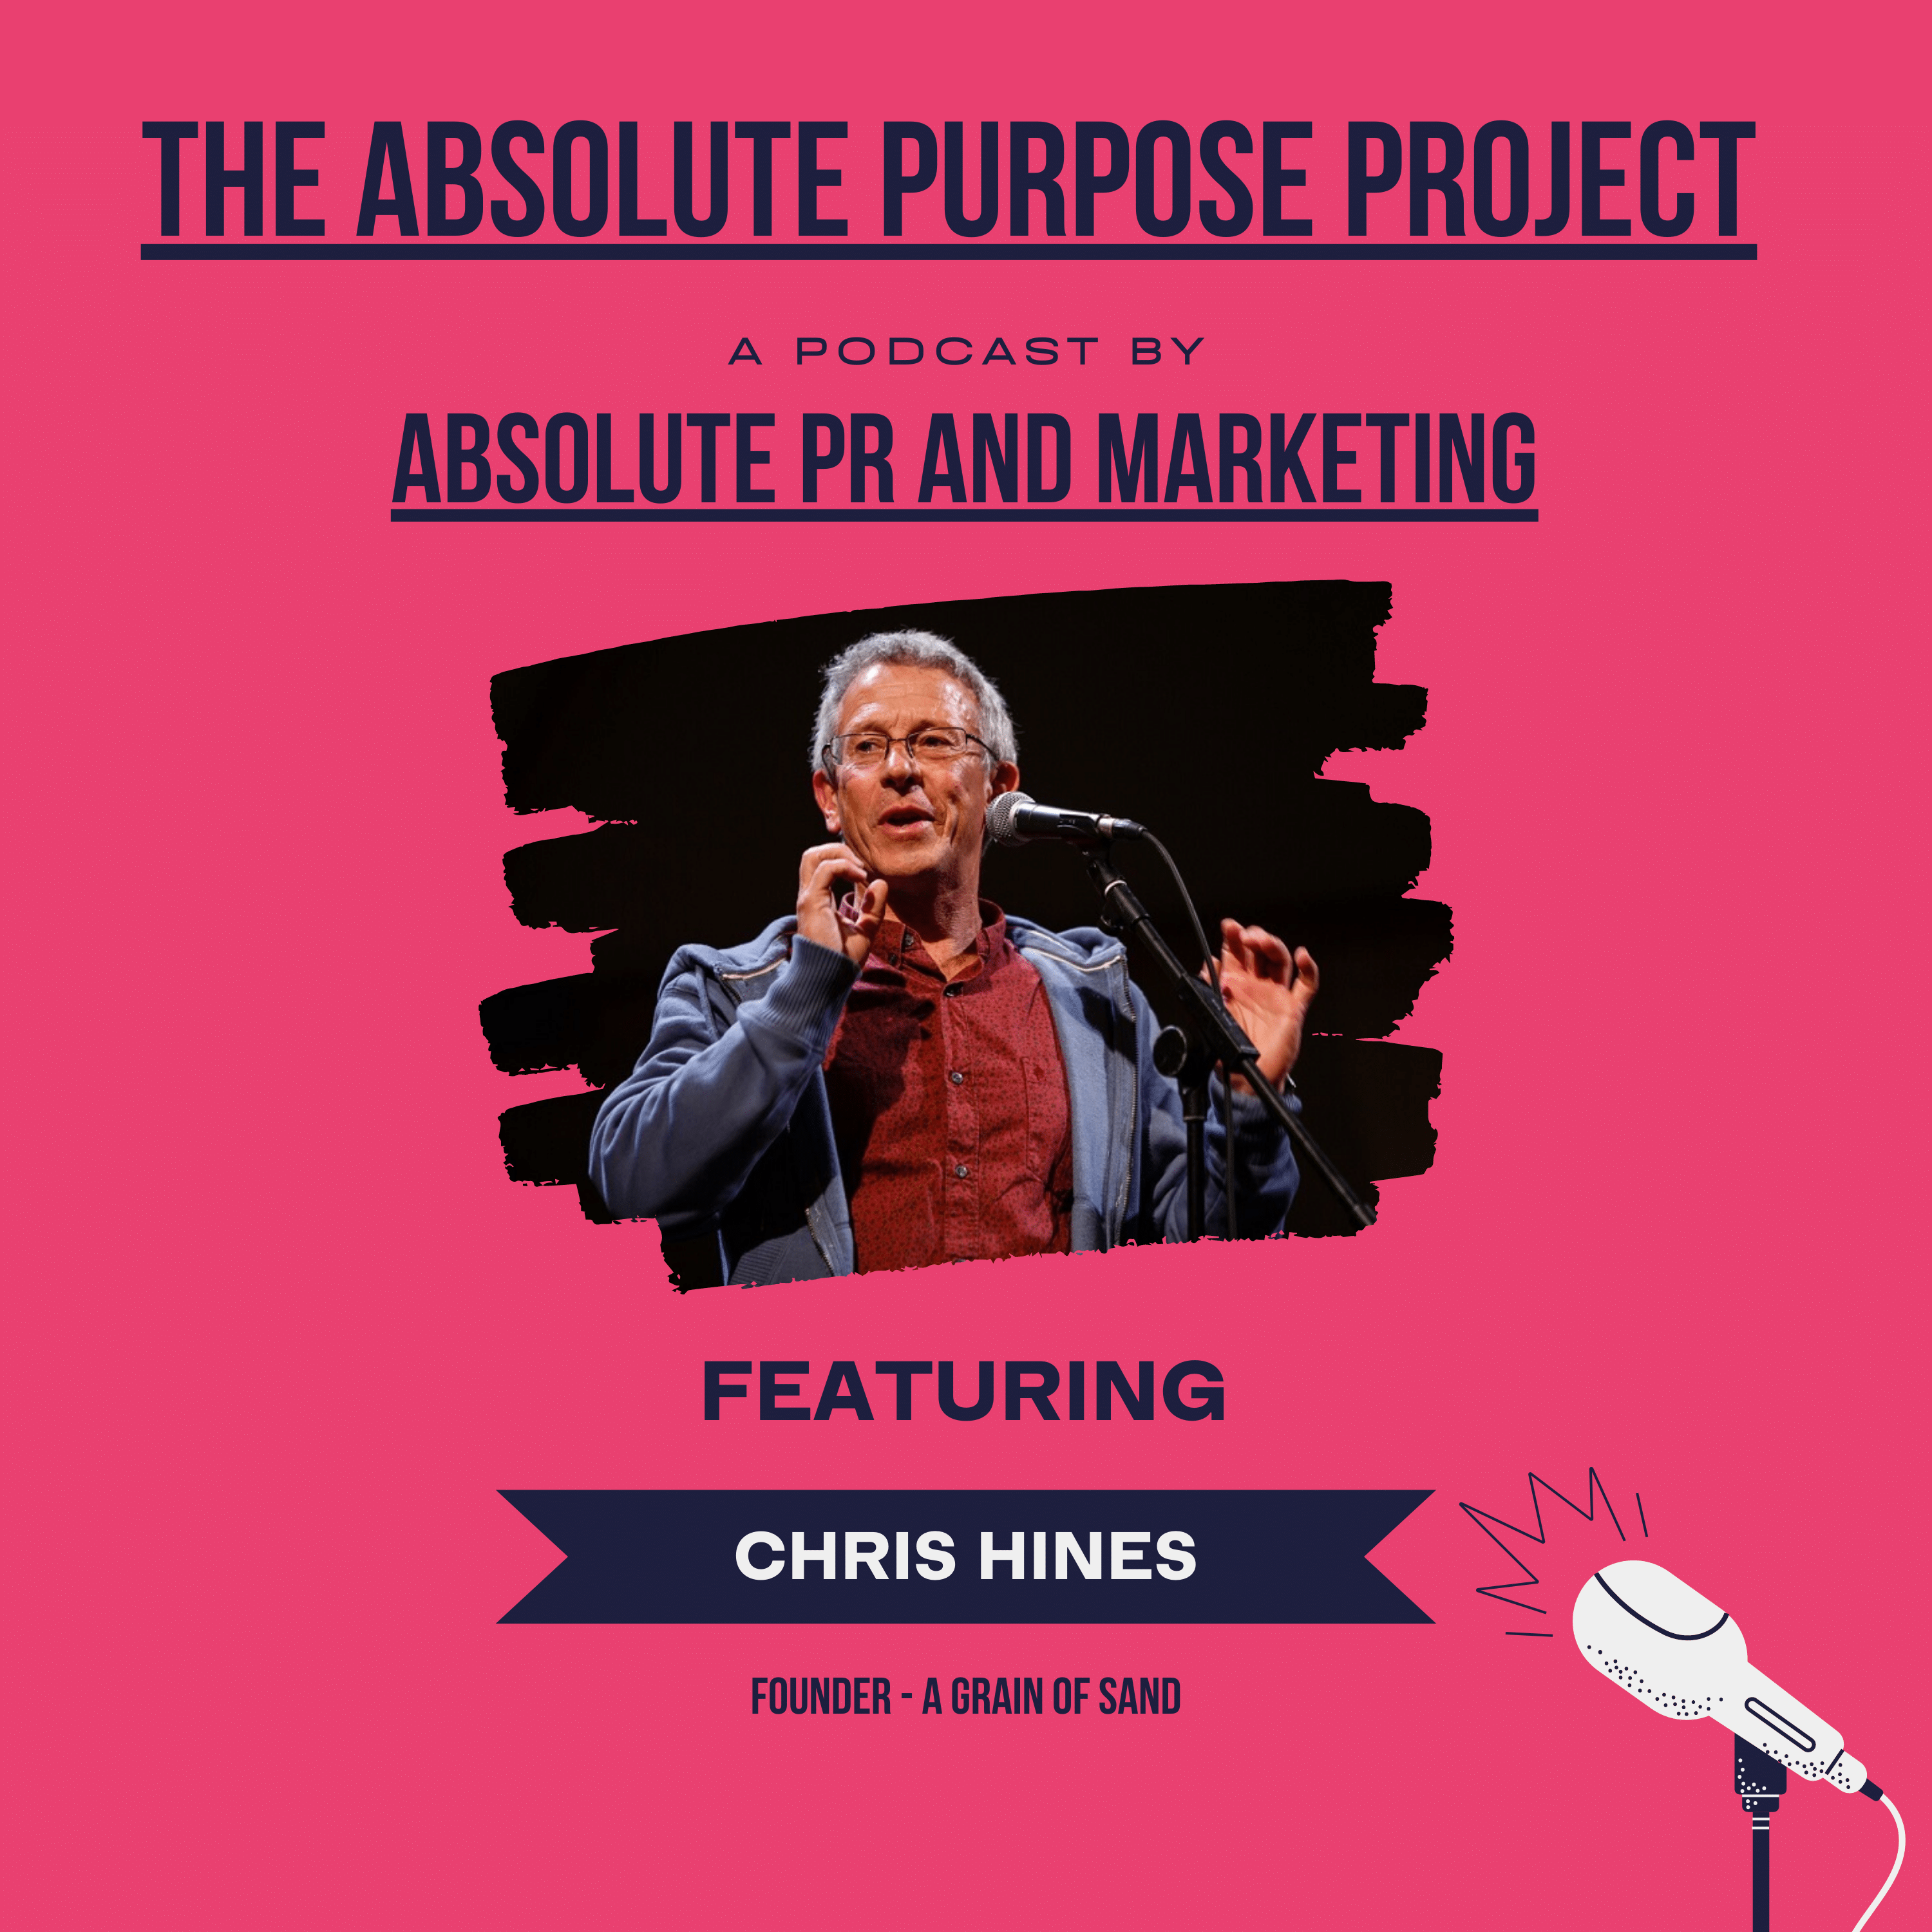 Chris Hines is on The Absolute Purpose Project